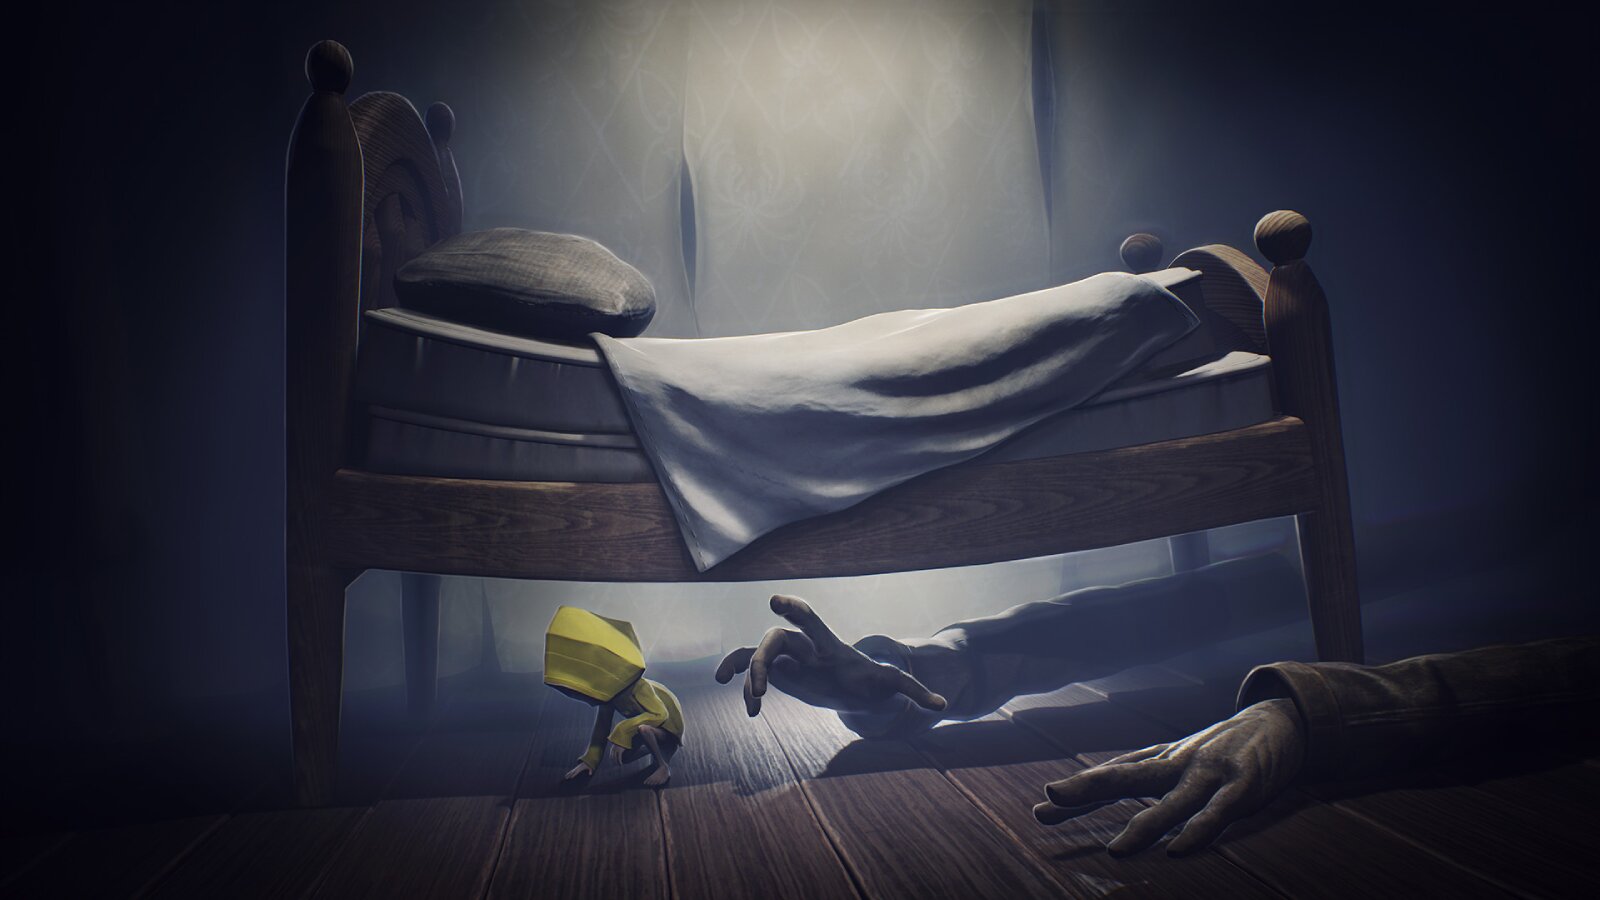 Little Nightmares mobile - Reveal Date trailer 